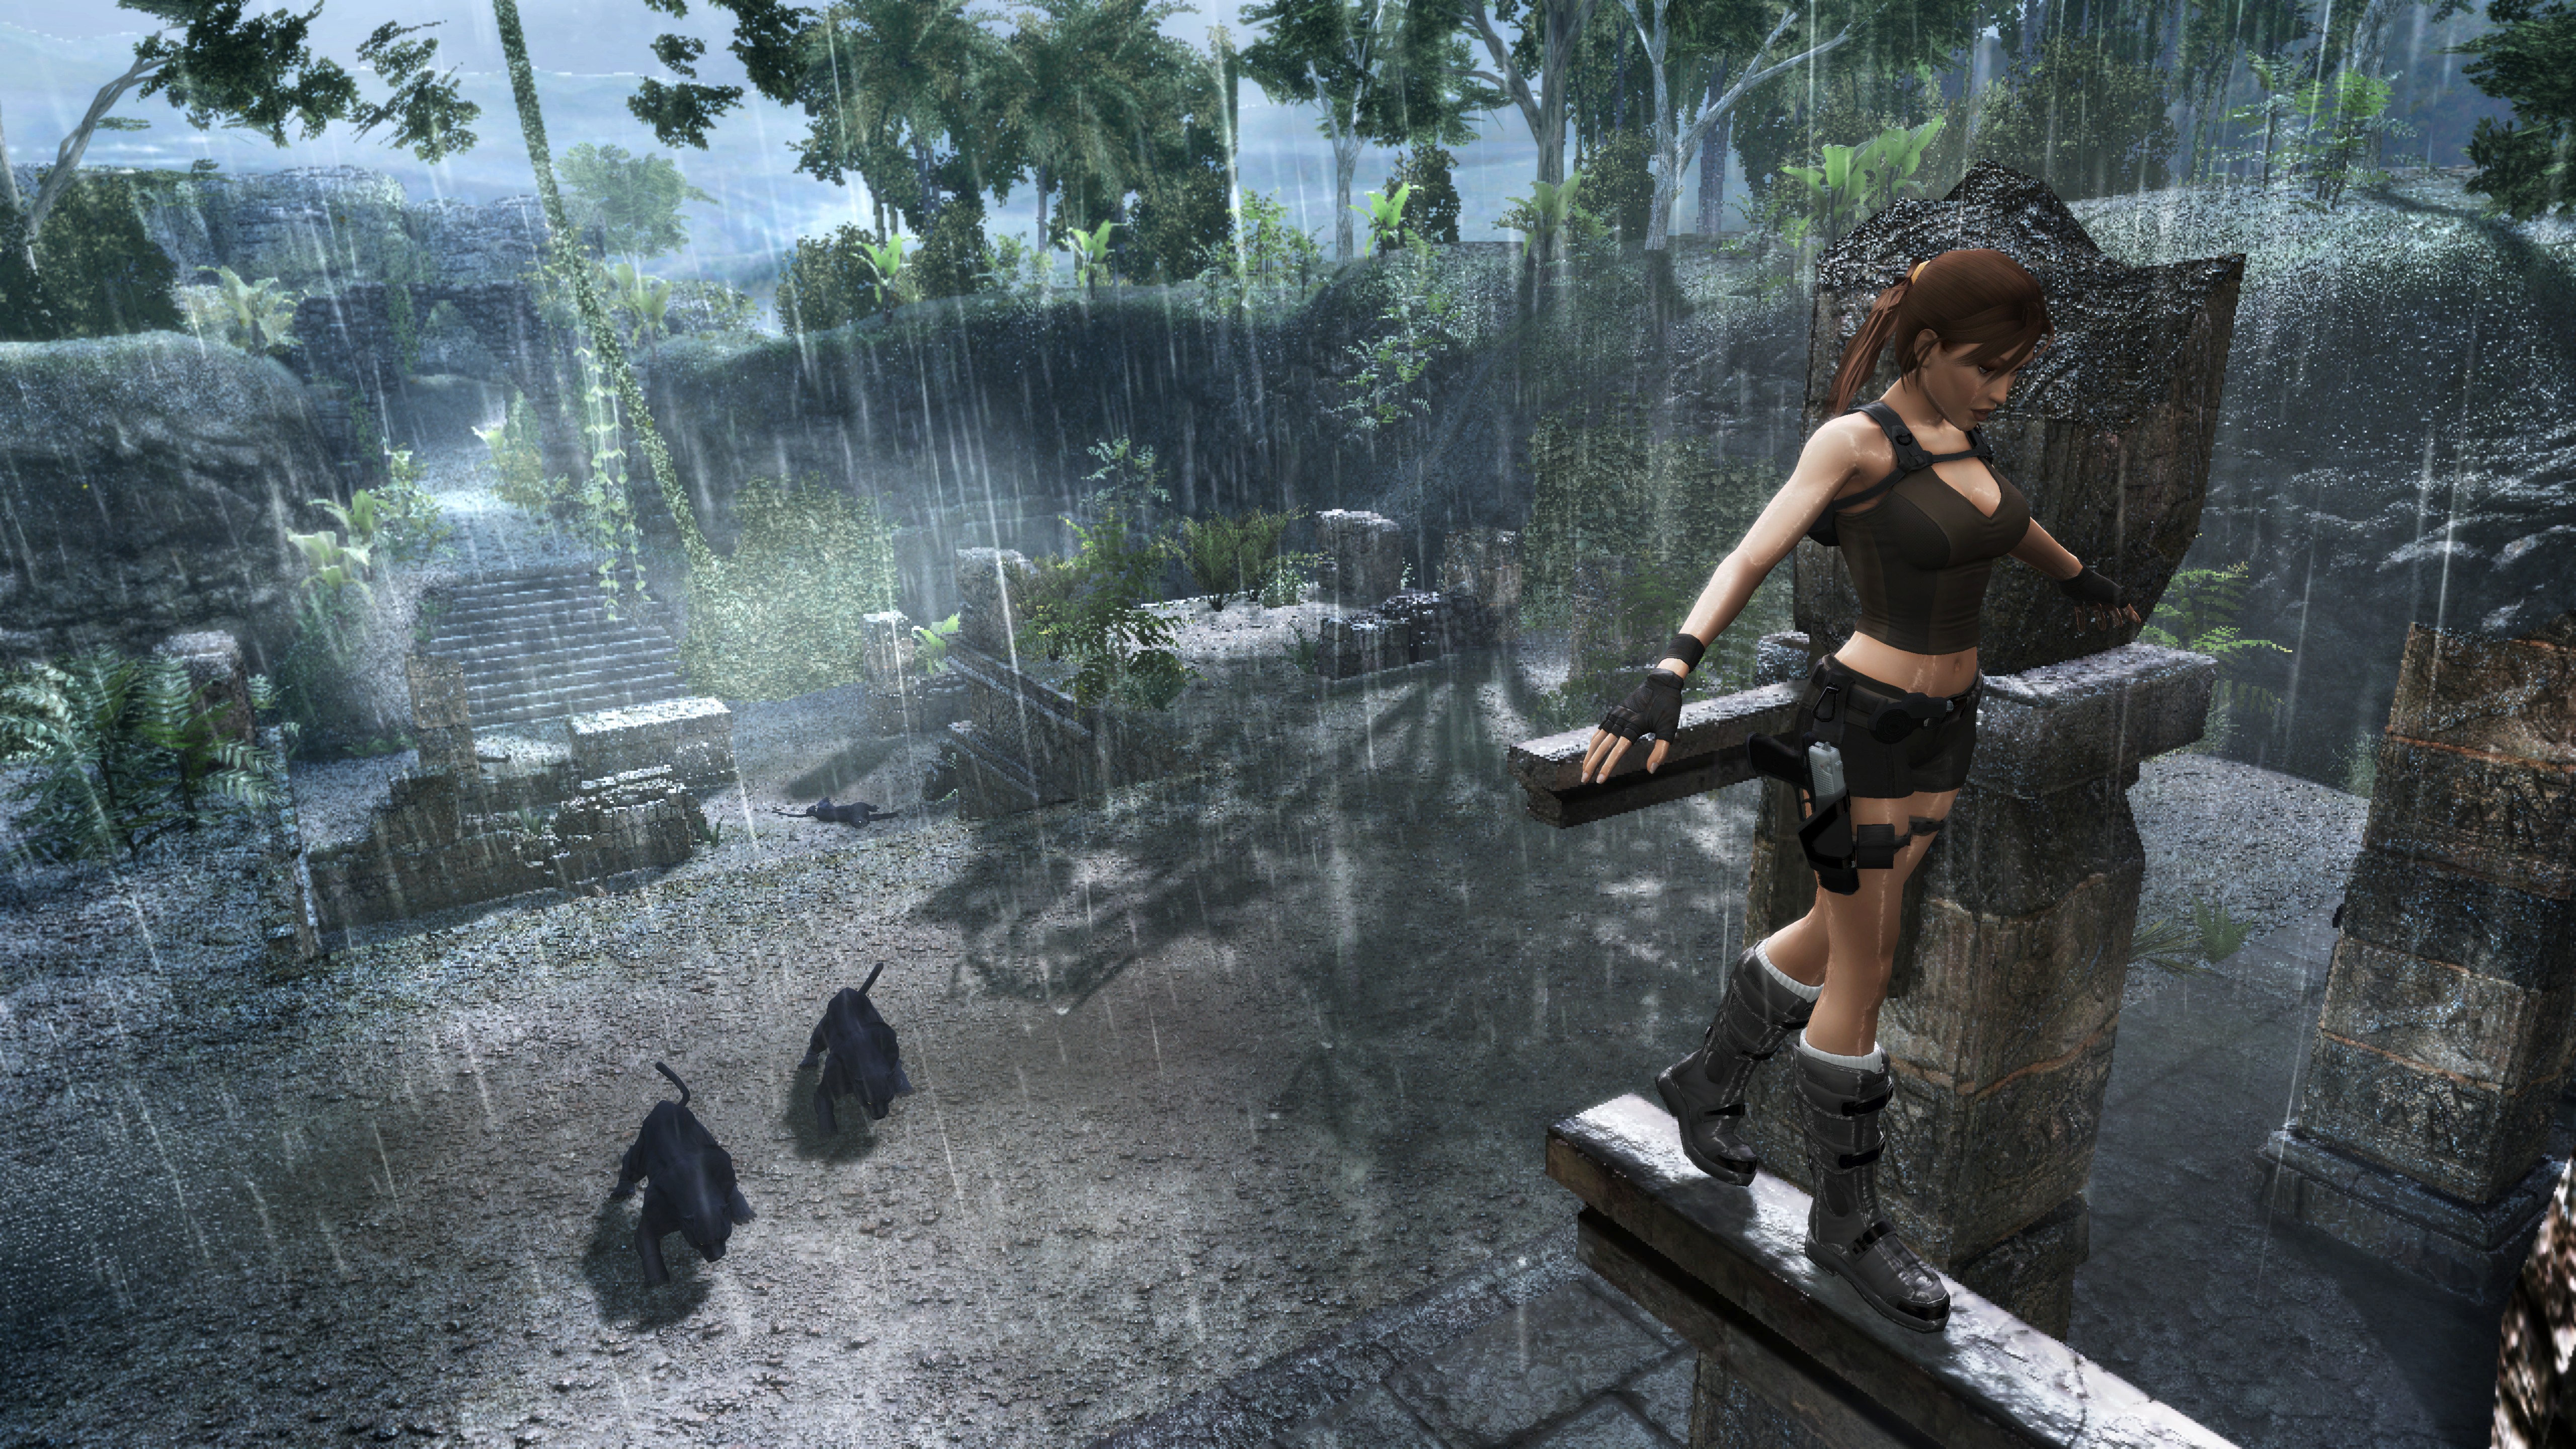 Media asset in full size related to 3dfxzone.it news item entitled as follows: Tomb Raider Underworld, Eidos pubblica 11 nuovi screenshots | Image Name: news6742_3.jpg